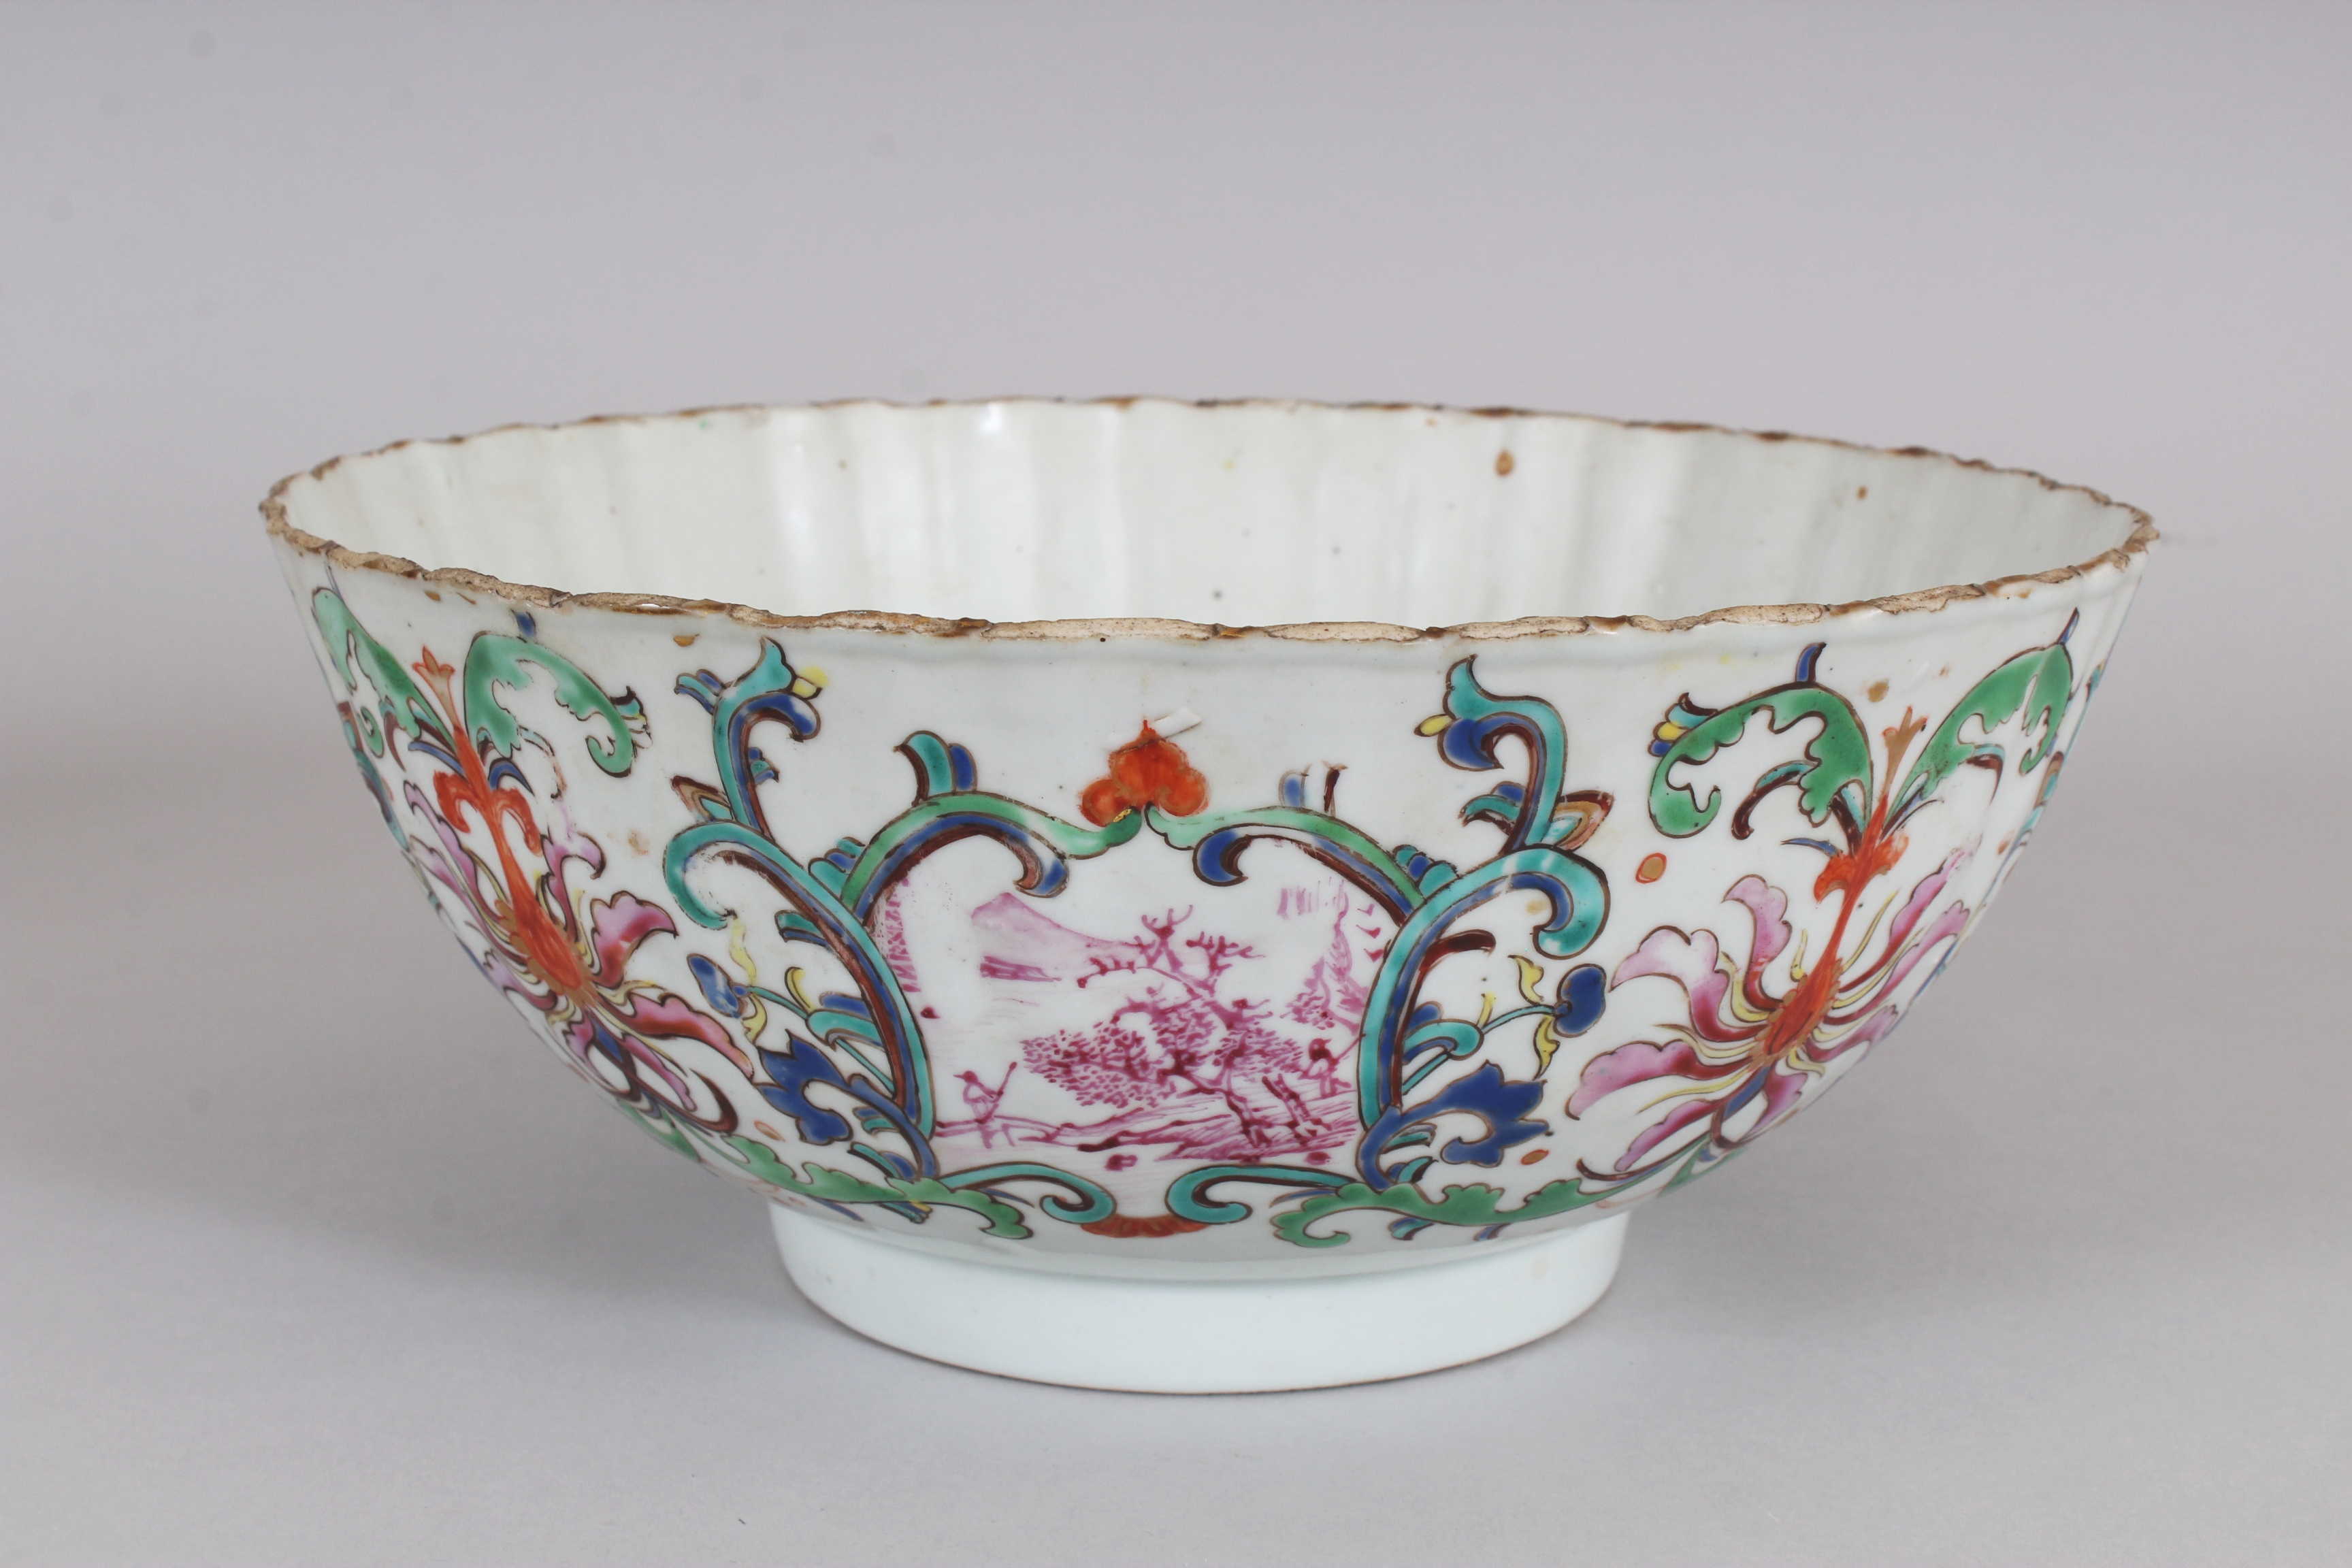 AN UNUSUAL EARLY 18TH CENTURY CHINESE FAMILLE ROSE FLUTED PORCELAIN BOWL, painted with formal - Image 4 of 8